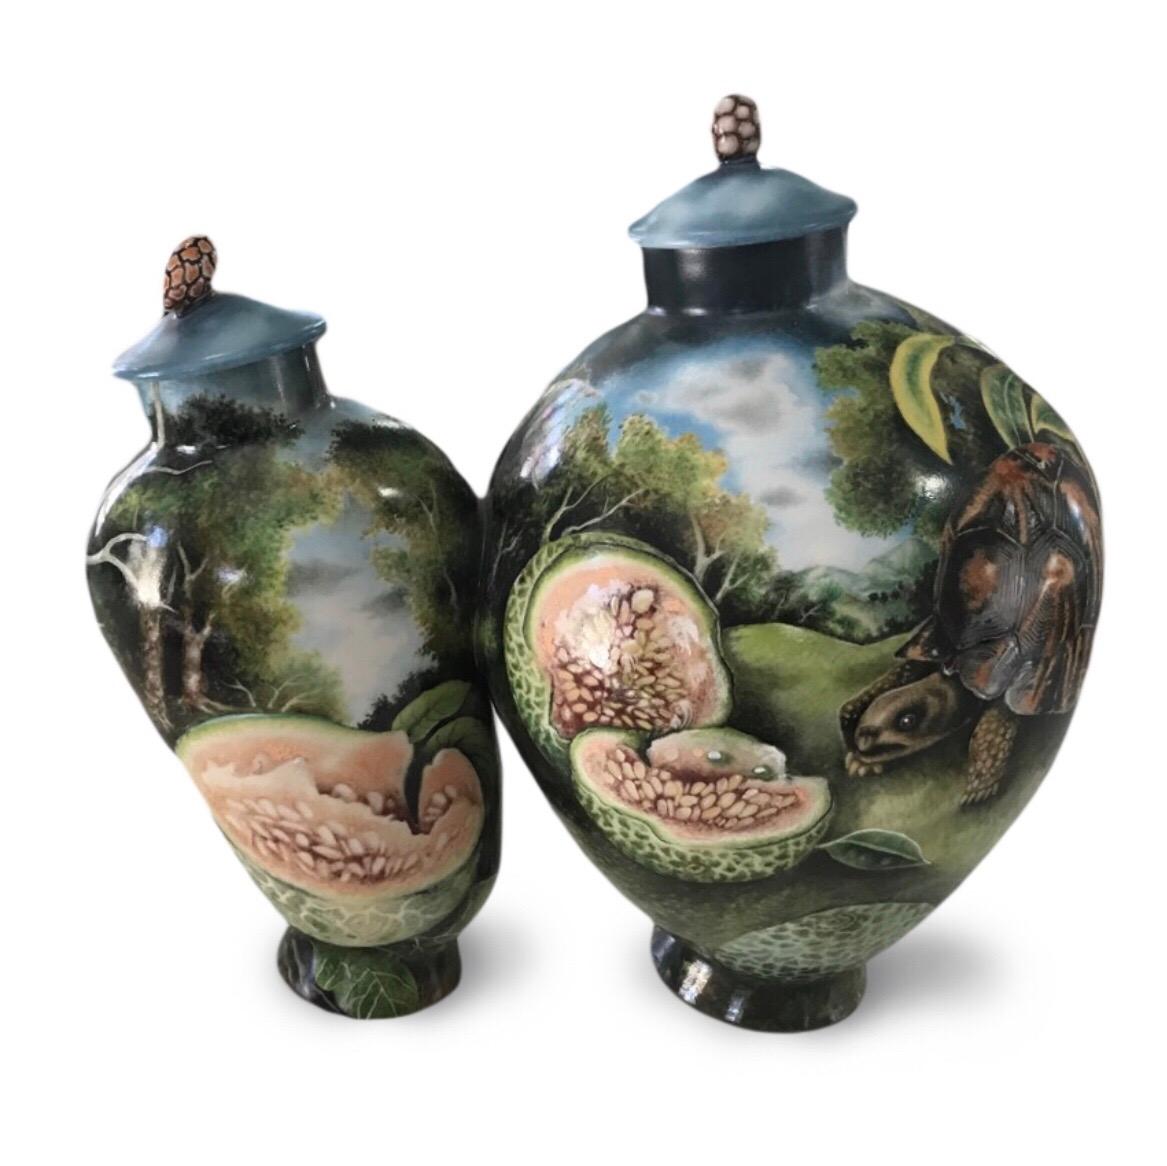 porcelain, china paints
signed by artist
Provenance: ASU Art Museum Auction, Tempe, AZ

BIO

Kurt Weiser was born in 1950 in Lansing Michigan. He studied ceramics under Ken Fergusen at the Kansas City Art Institute from 1972-76 and then completed an